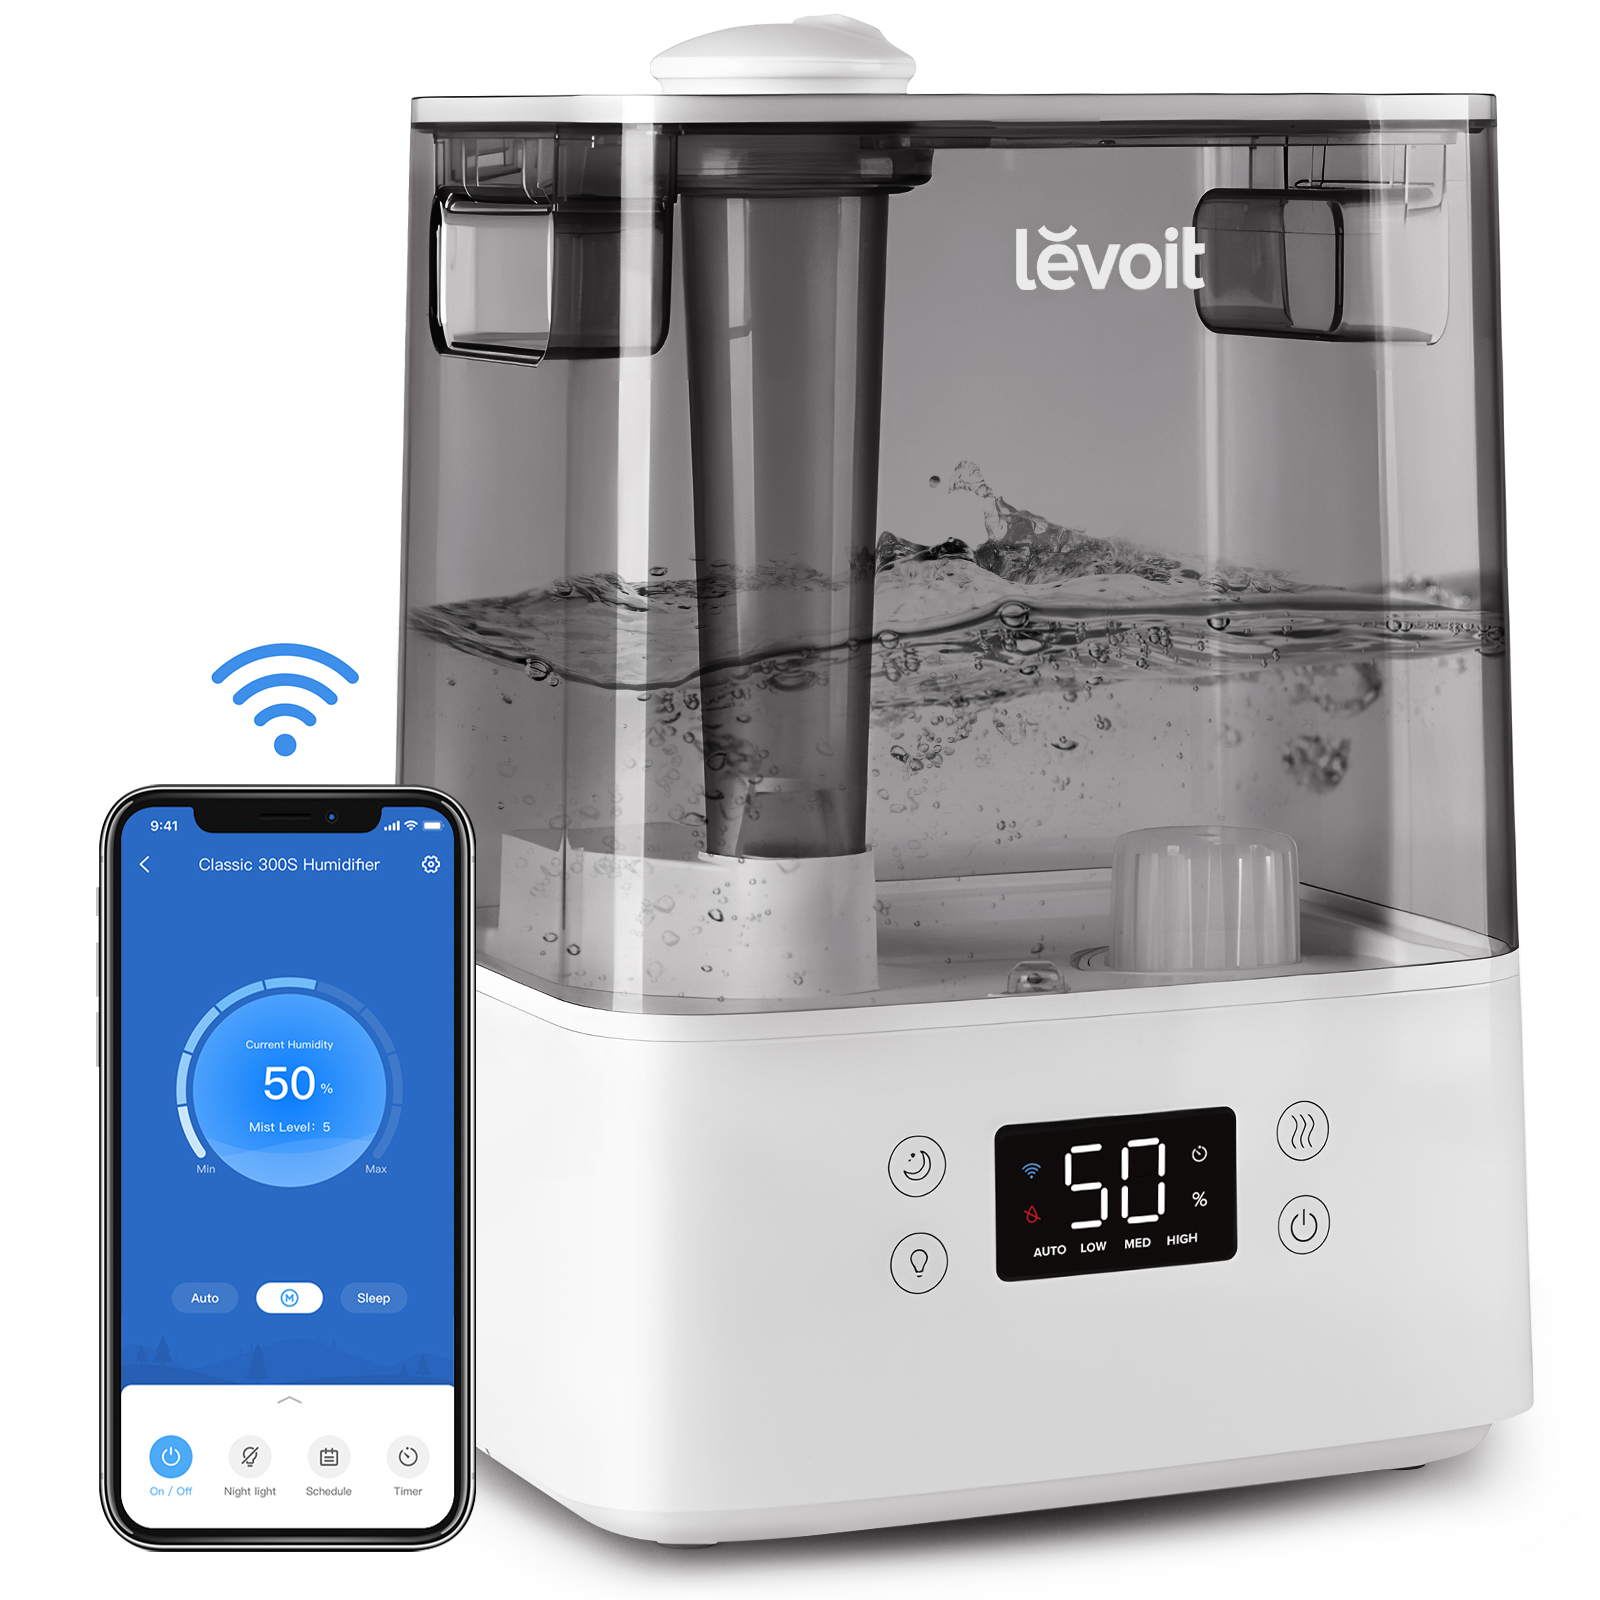 Levoit Cool Mist Humidifier for Room, Smart Top Fill with Nightlight, 6L,Gray - image 1 of 11